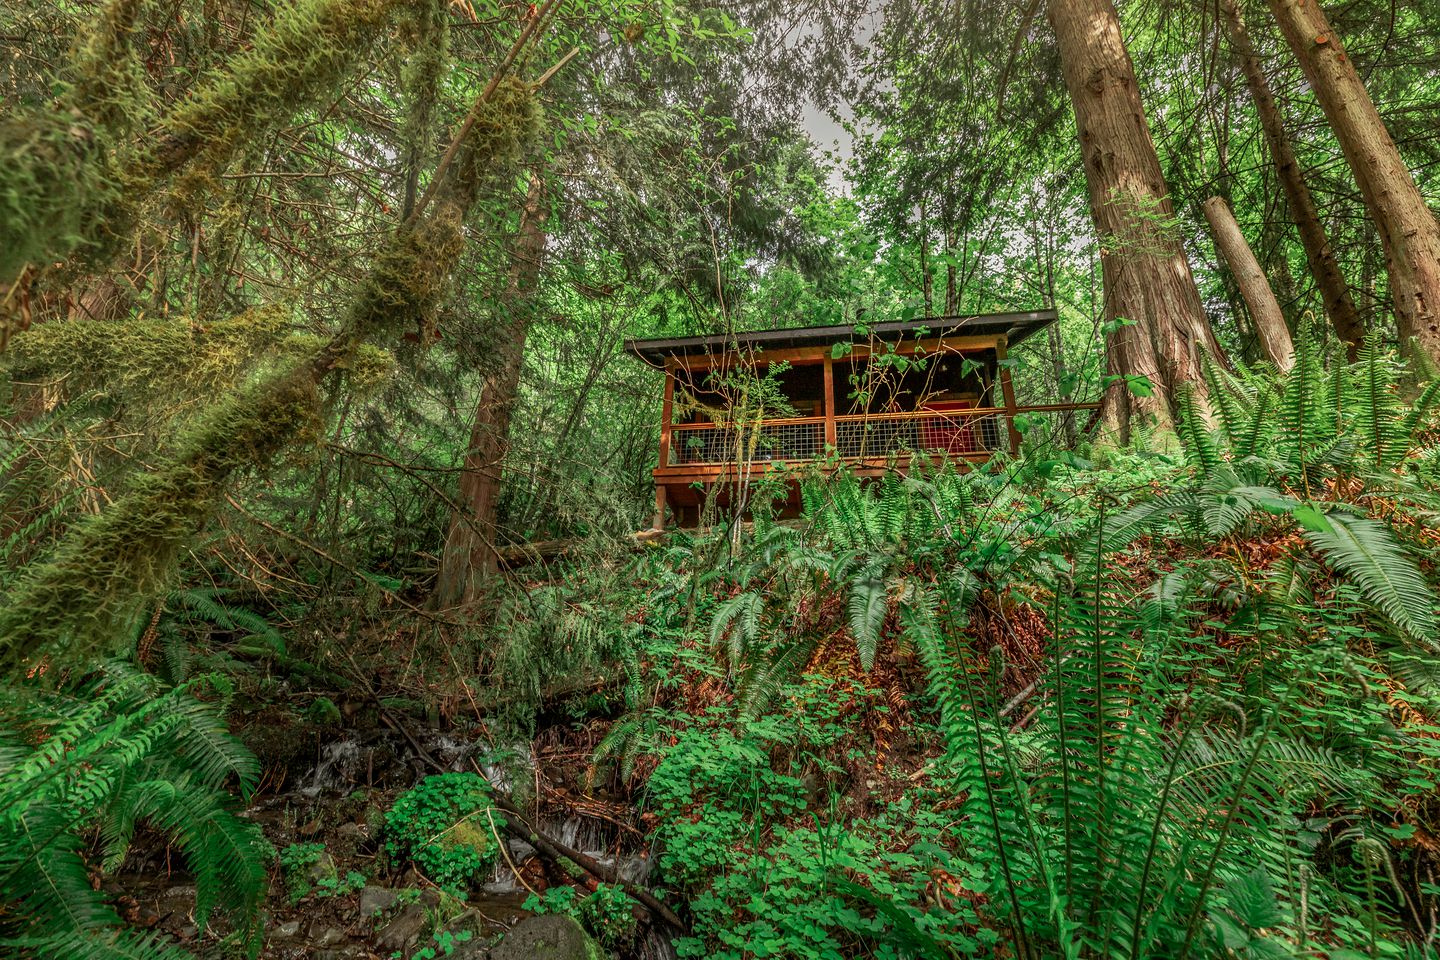 The cabin sitting in a dense forest with ferns